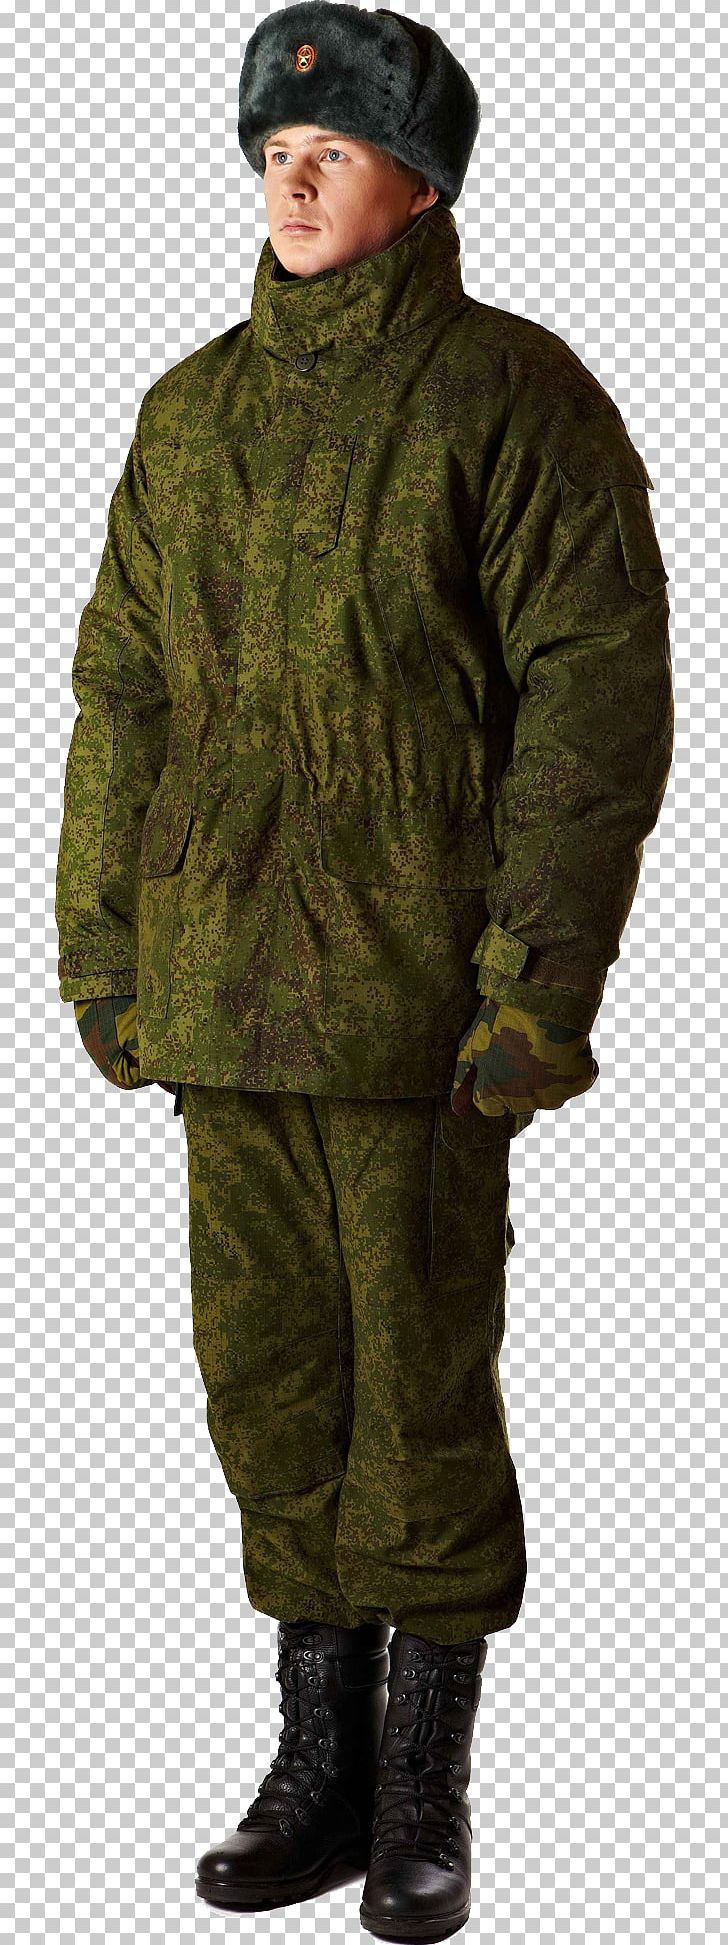 Russian Armed Forces Army Combat Uniform PNG, Clipart, Army, Camouflage, Free, Hat, Infantry Free PNG Download